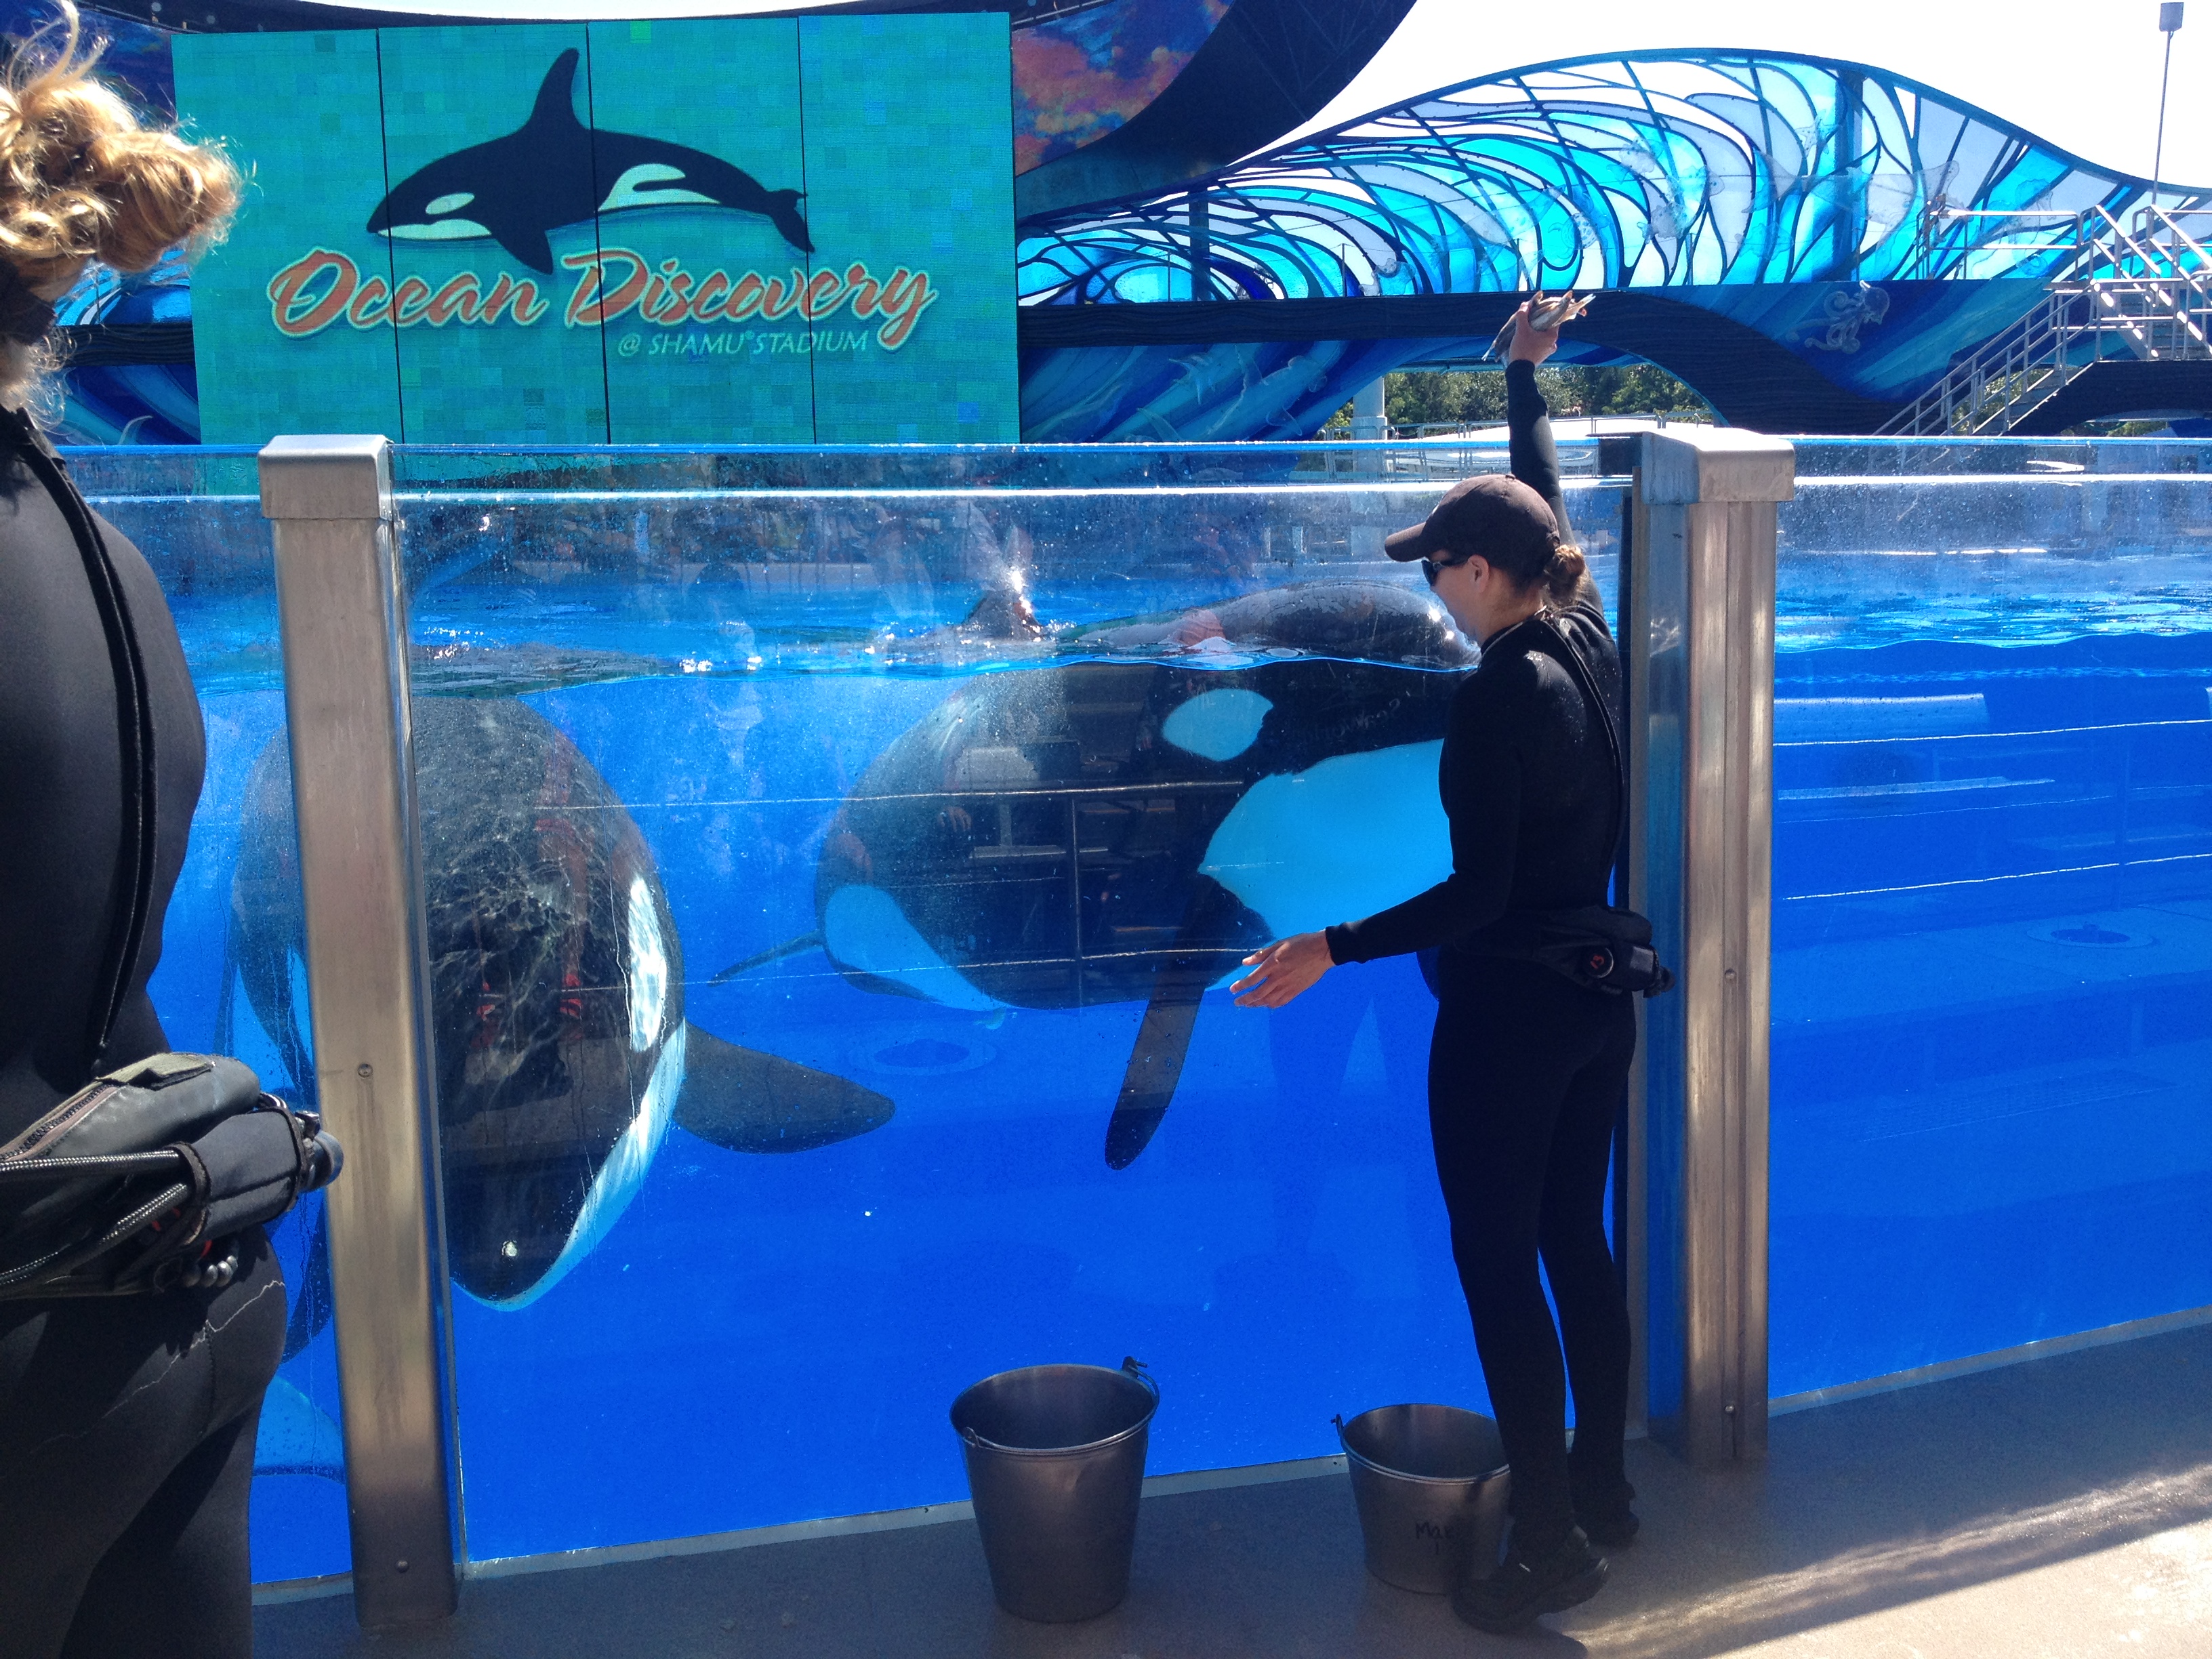 Sea World field trip offered education and fun for second graders